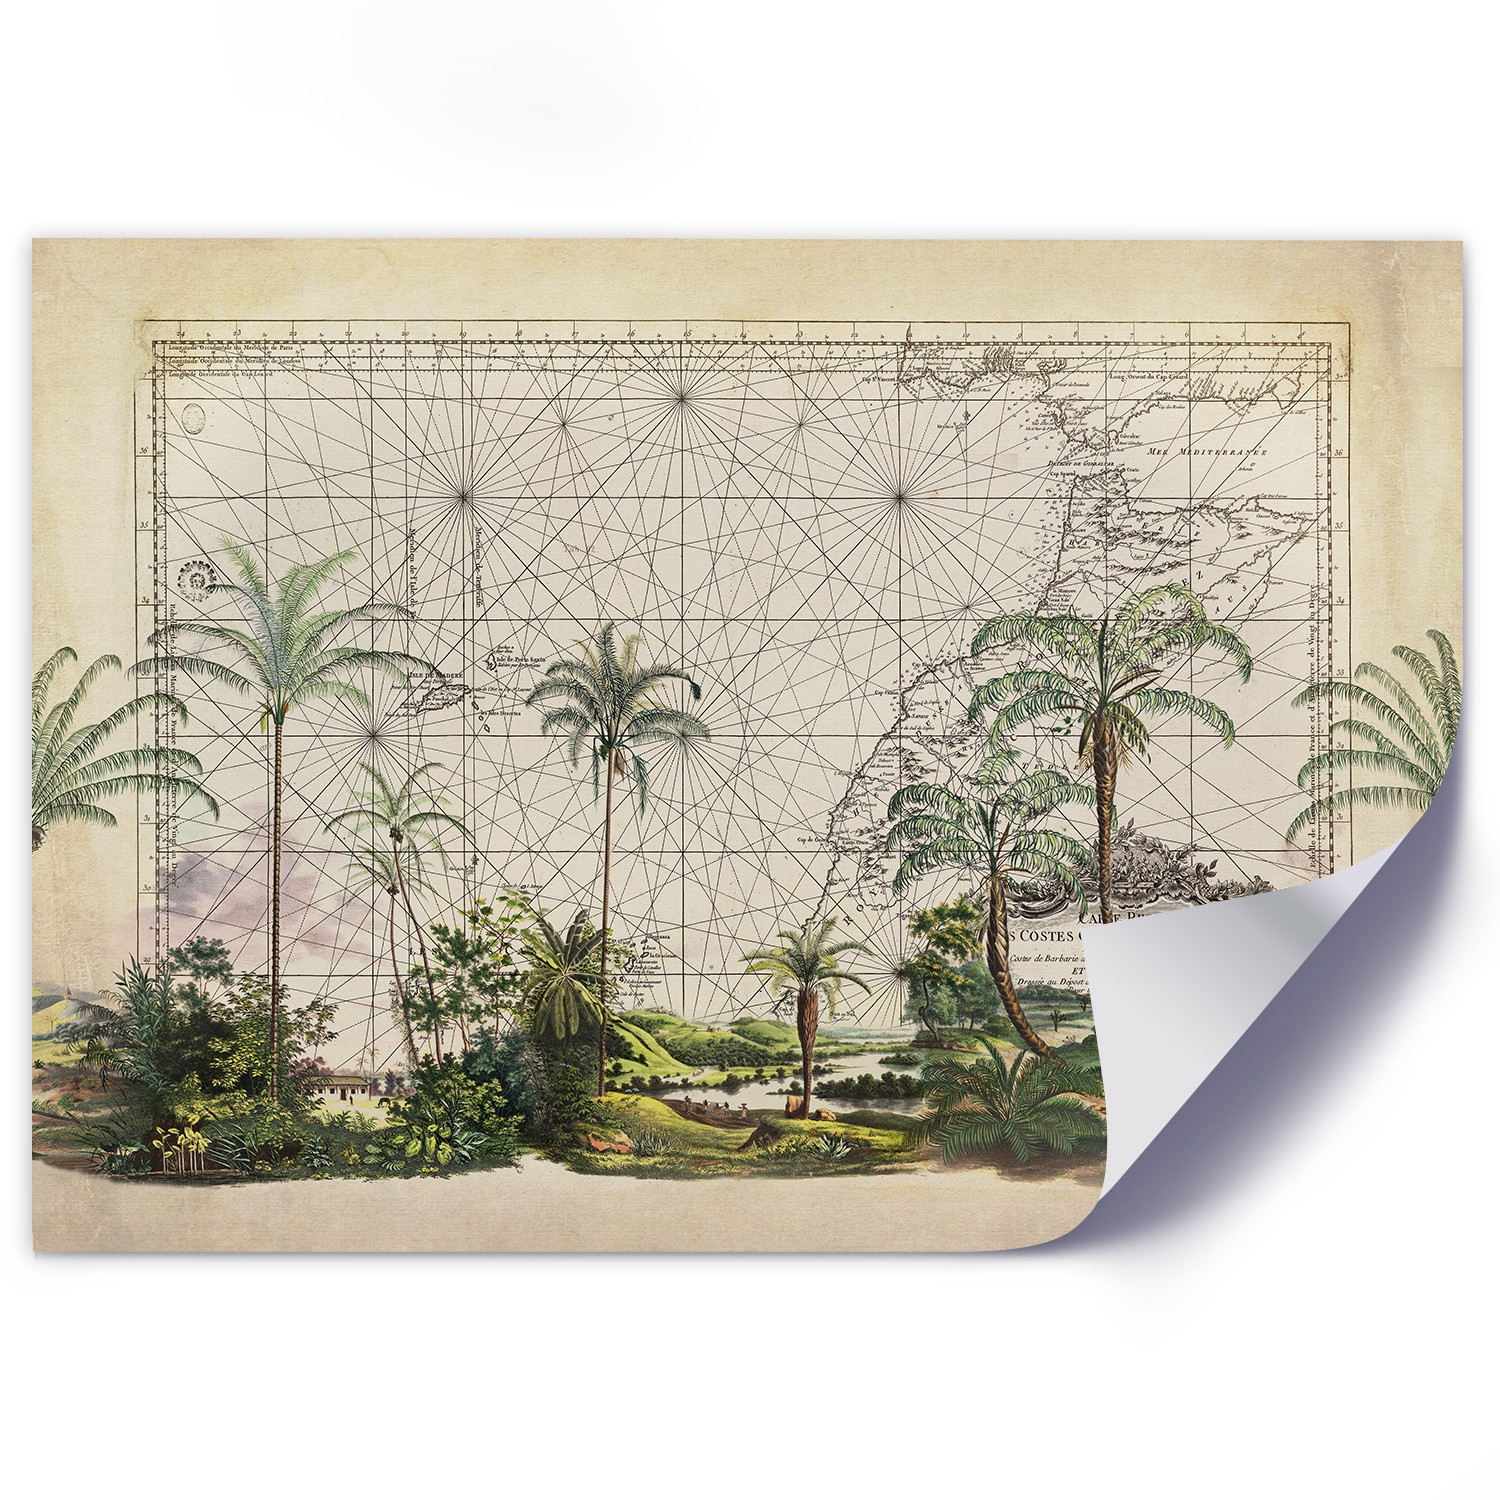 Historical map and tropical plants